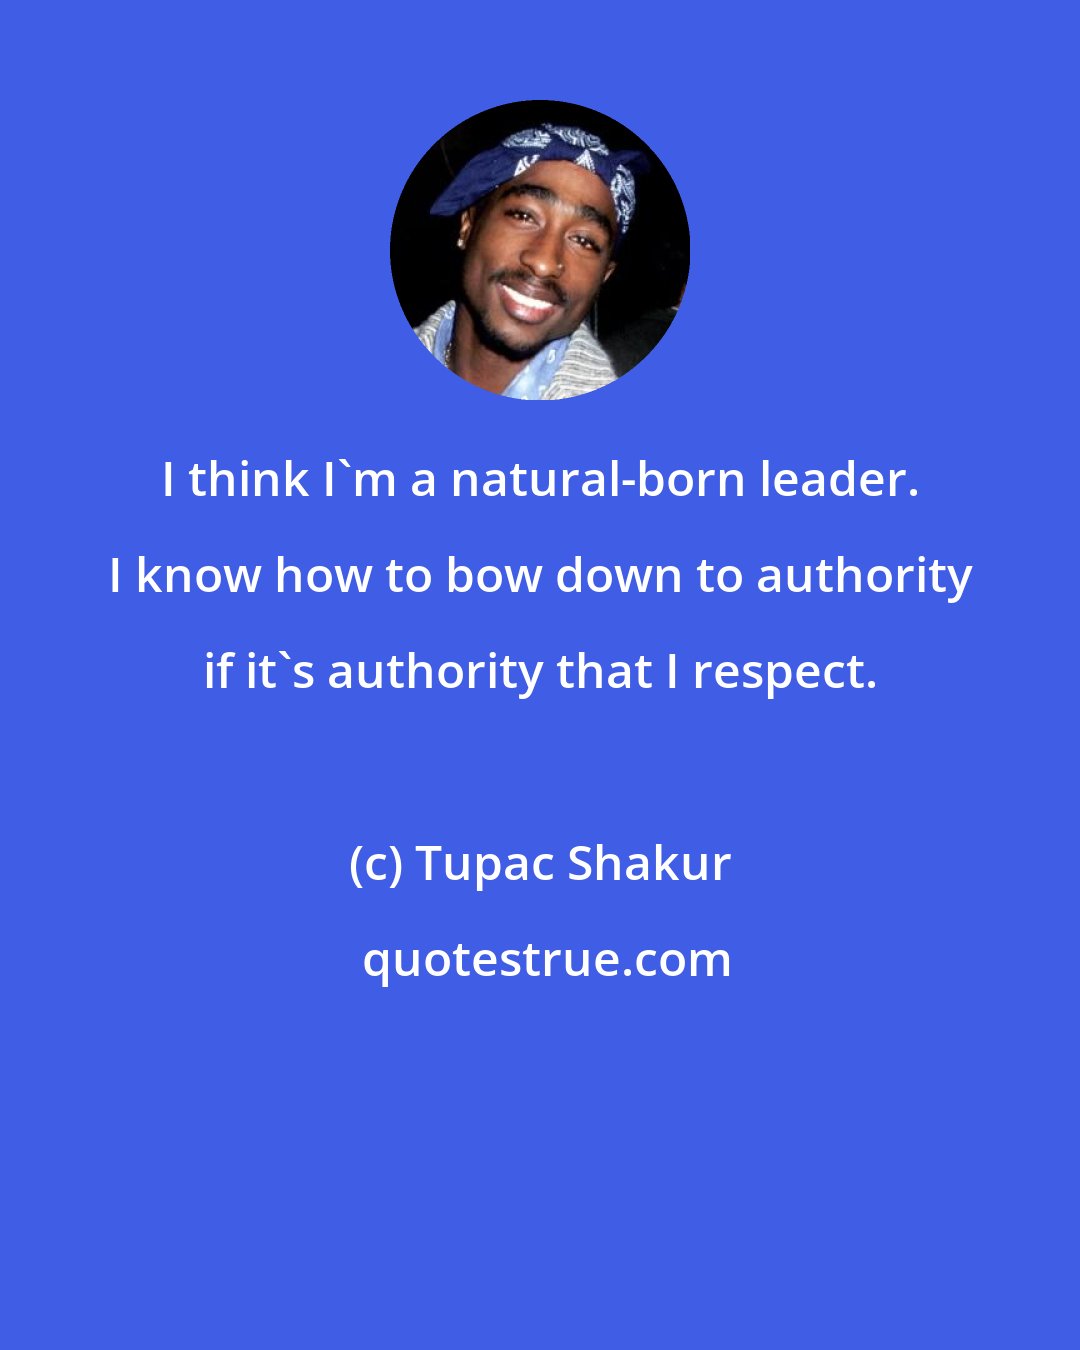 Tupac Shakur: I think I'm a natural-born leader. I know how to bow down to authority if it's authority that I respect.